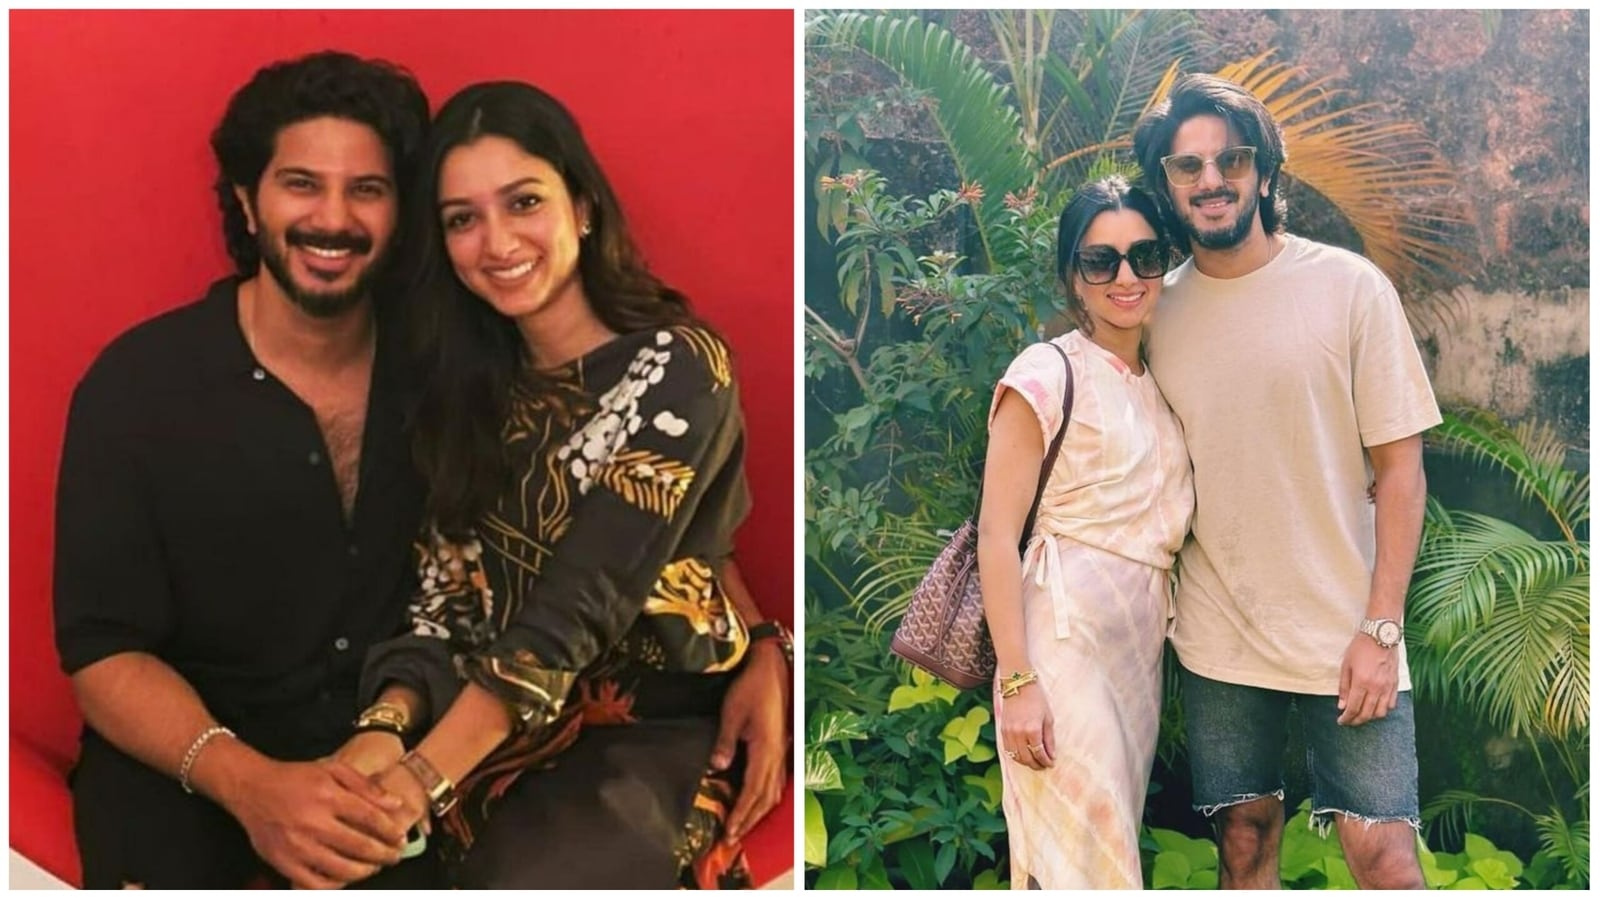 Amaland Porn - Dulquer recalls milestones with wife on anniversary: 'When we bought our  houseâ€¦' | Bollywood - Hindustan Times